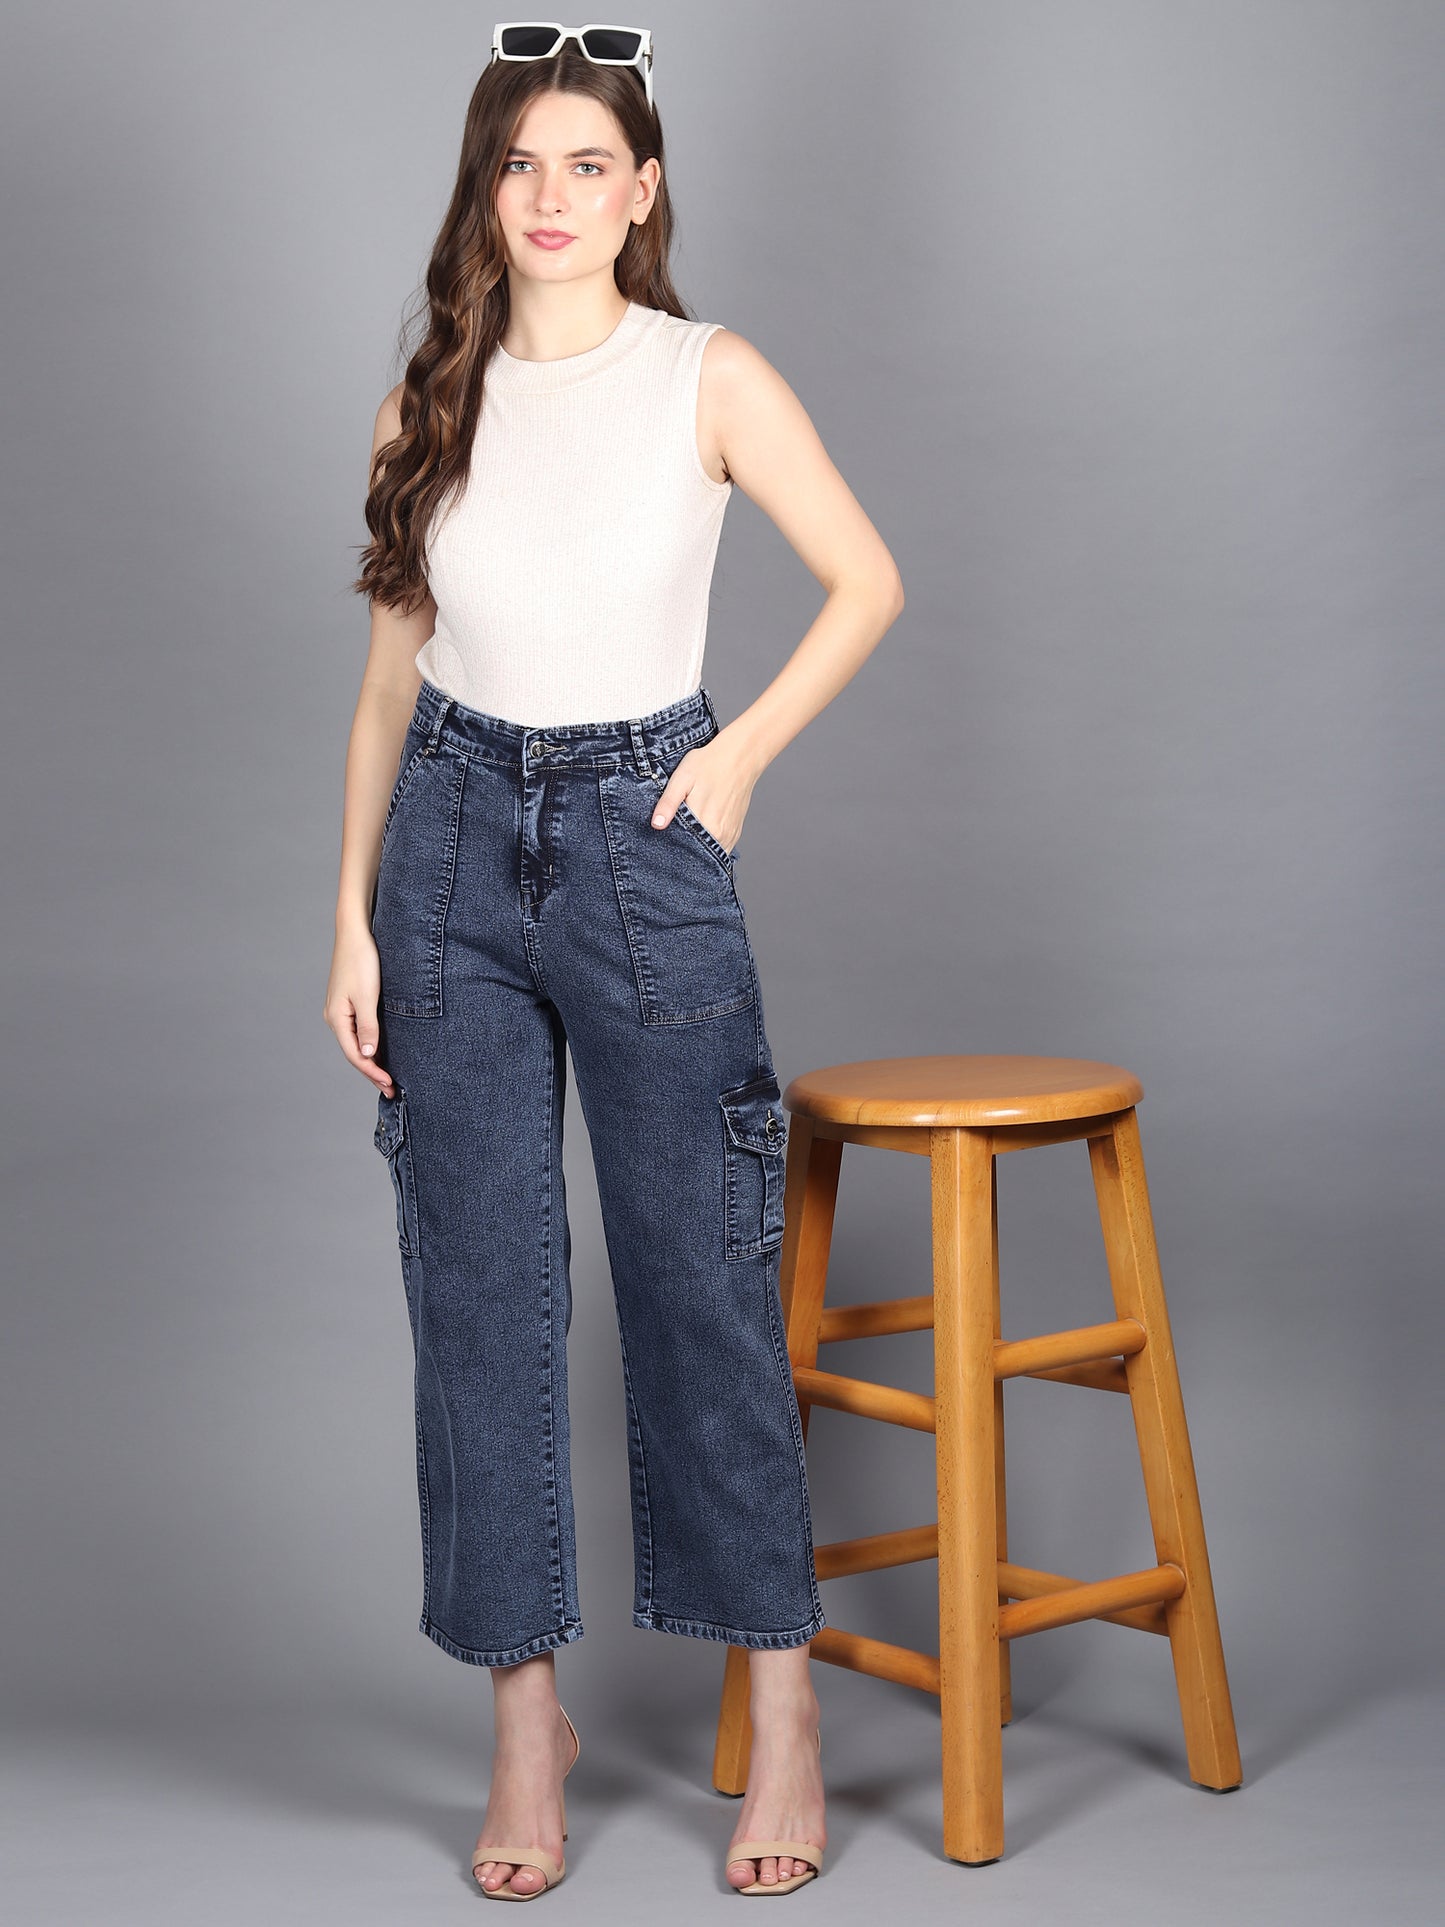 Navy Cargo Jeans For Women High Waist Straight Fit Stretchable Denim - 1215